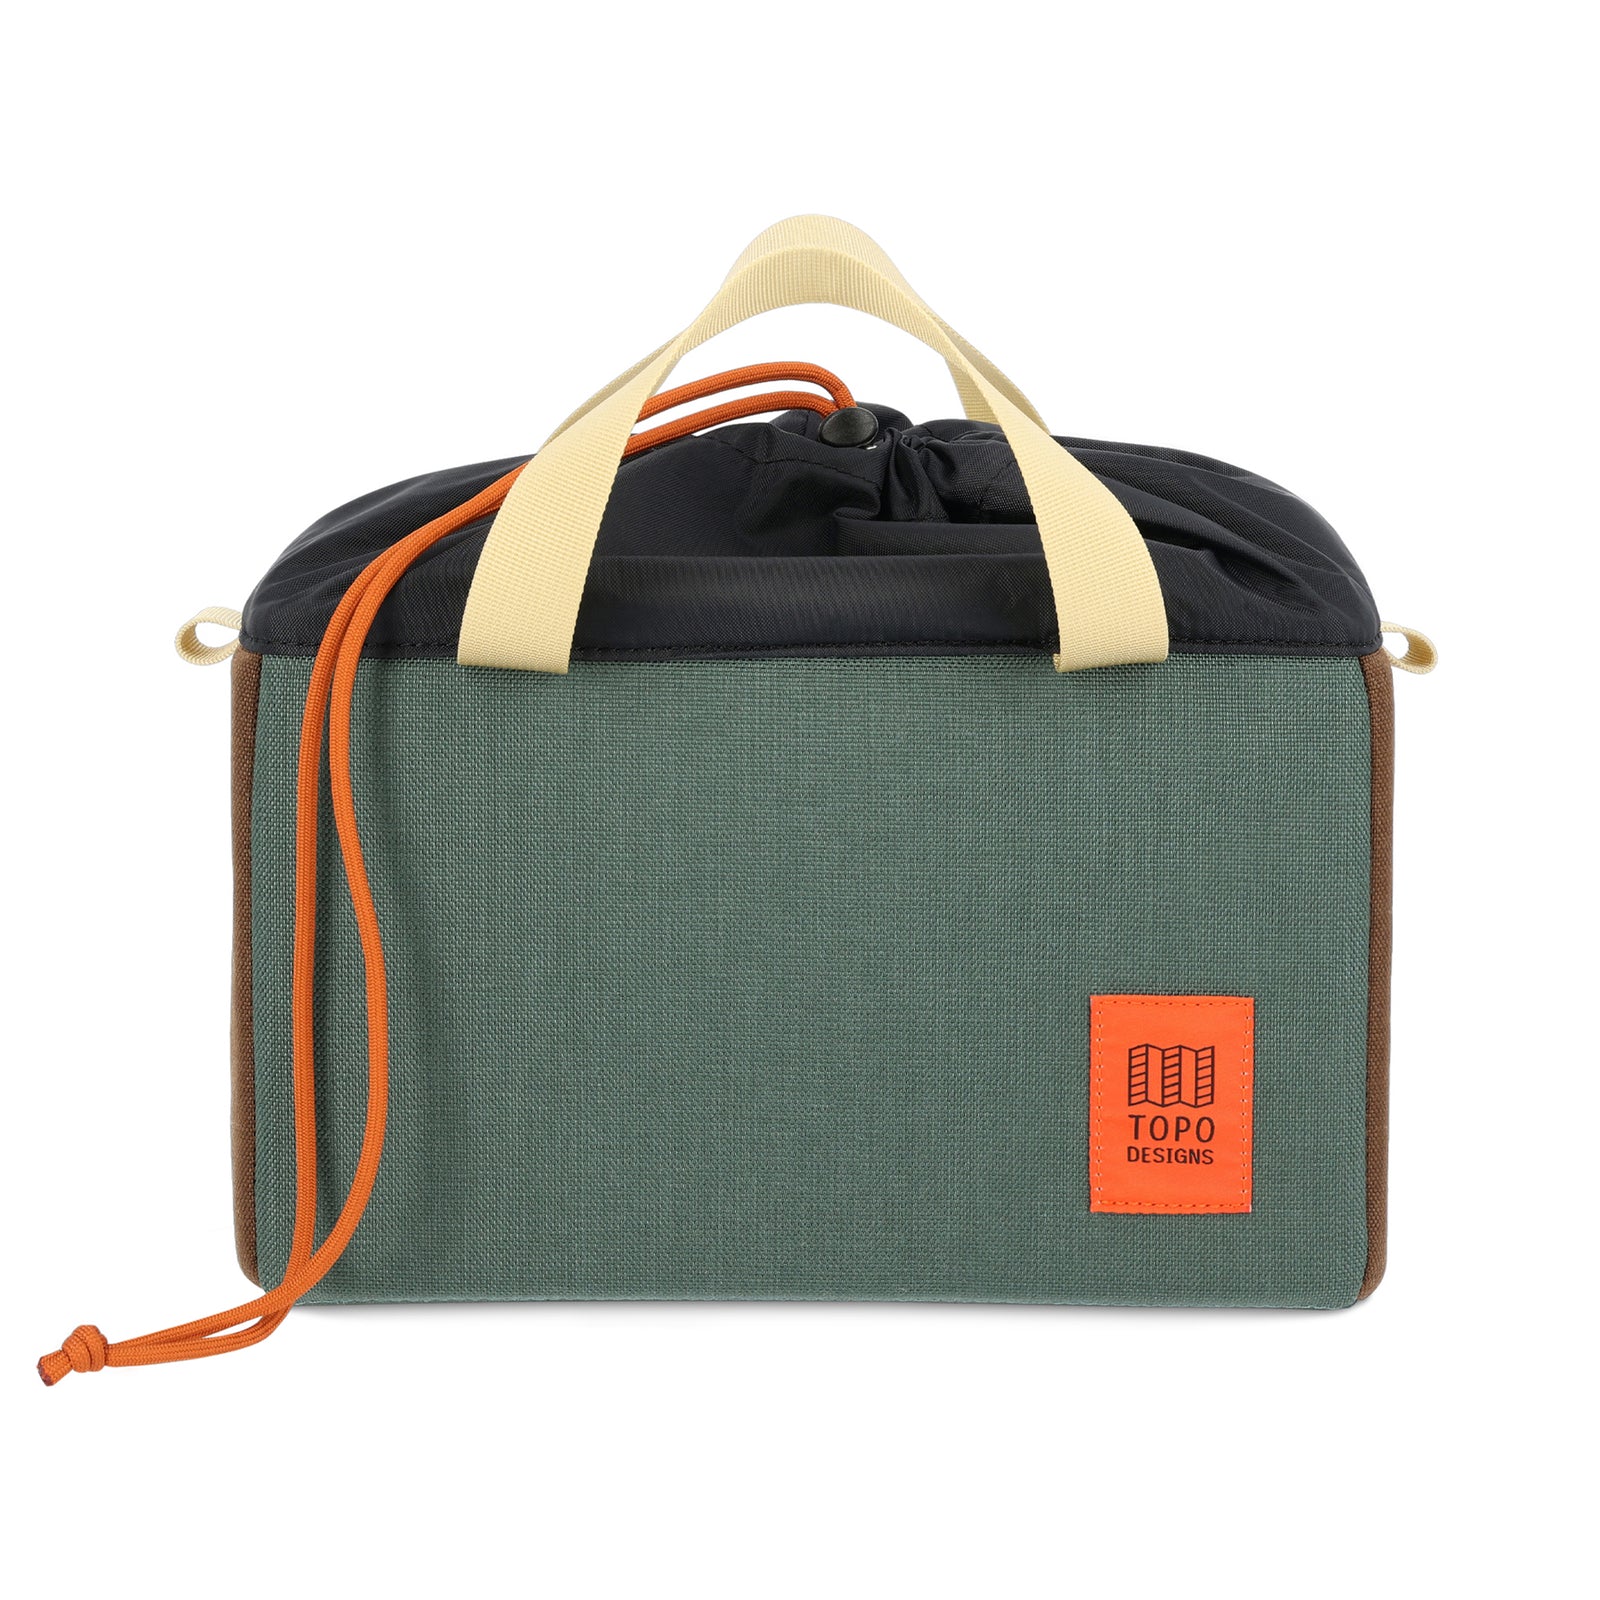 Topo Designs Camera Cube protective organizer photography bag in "Forest / Cocoa" green brown